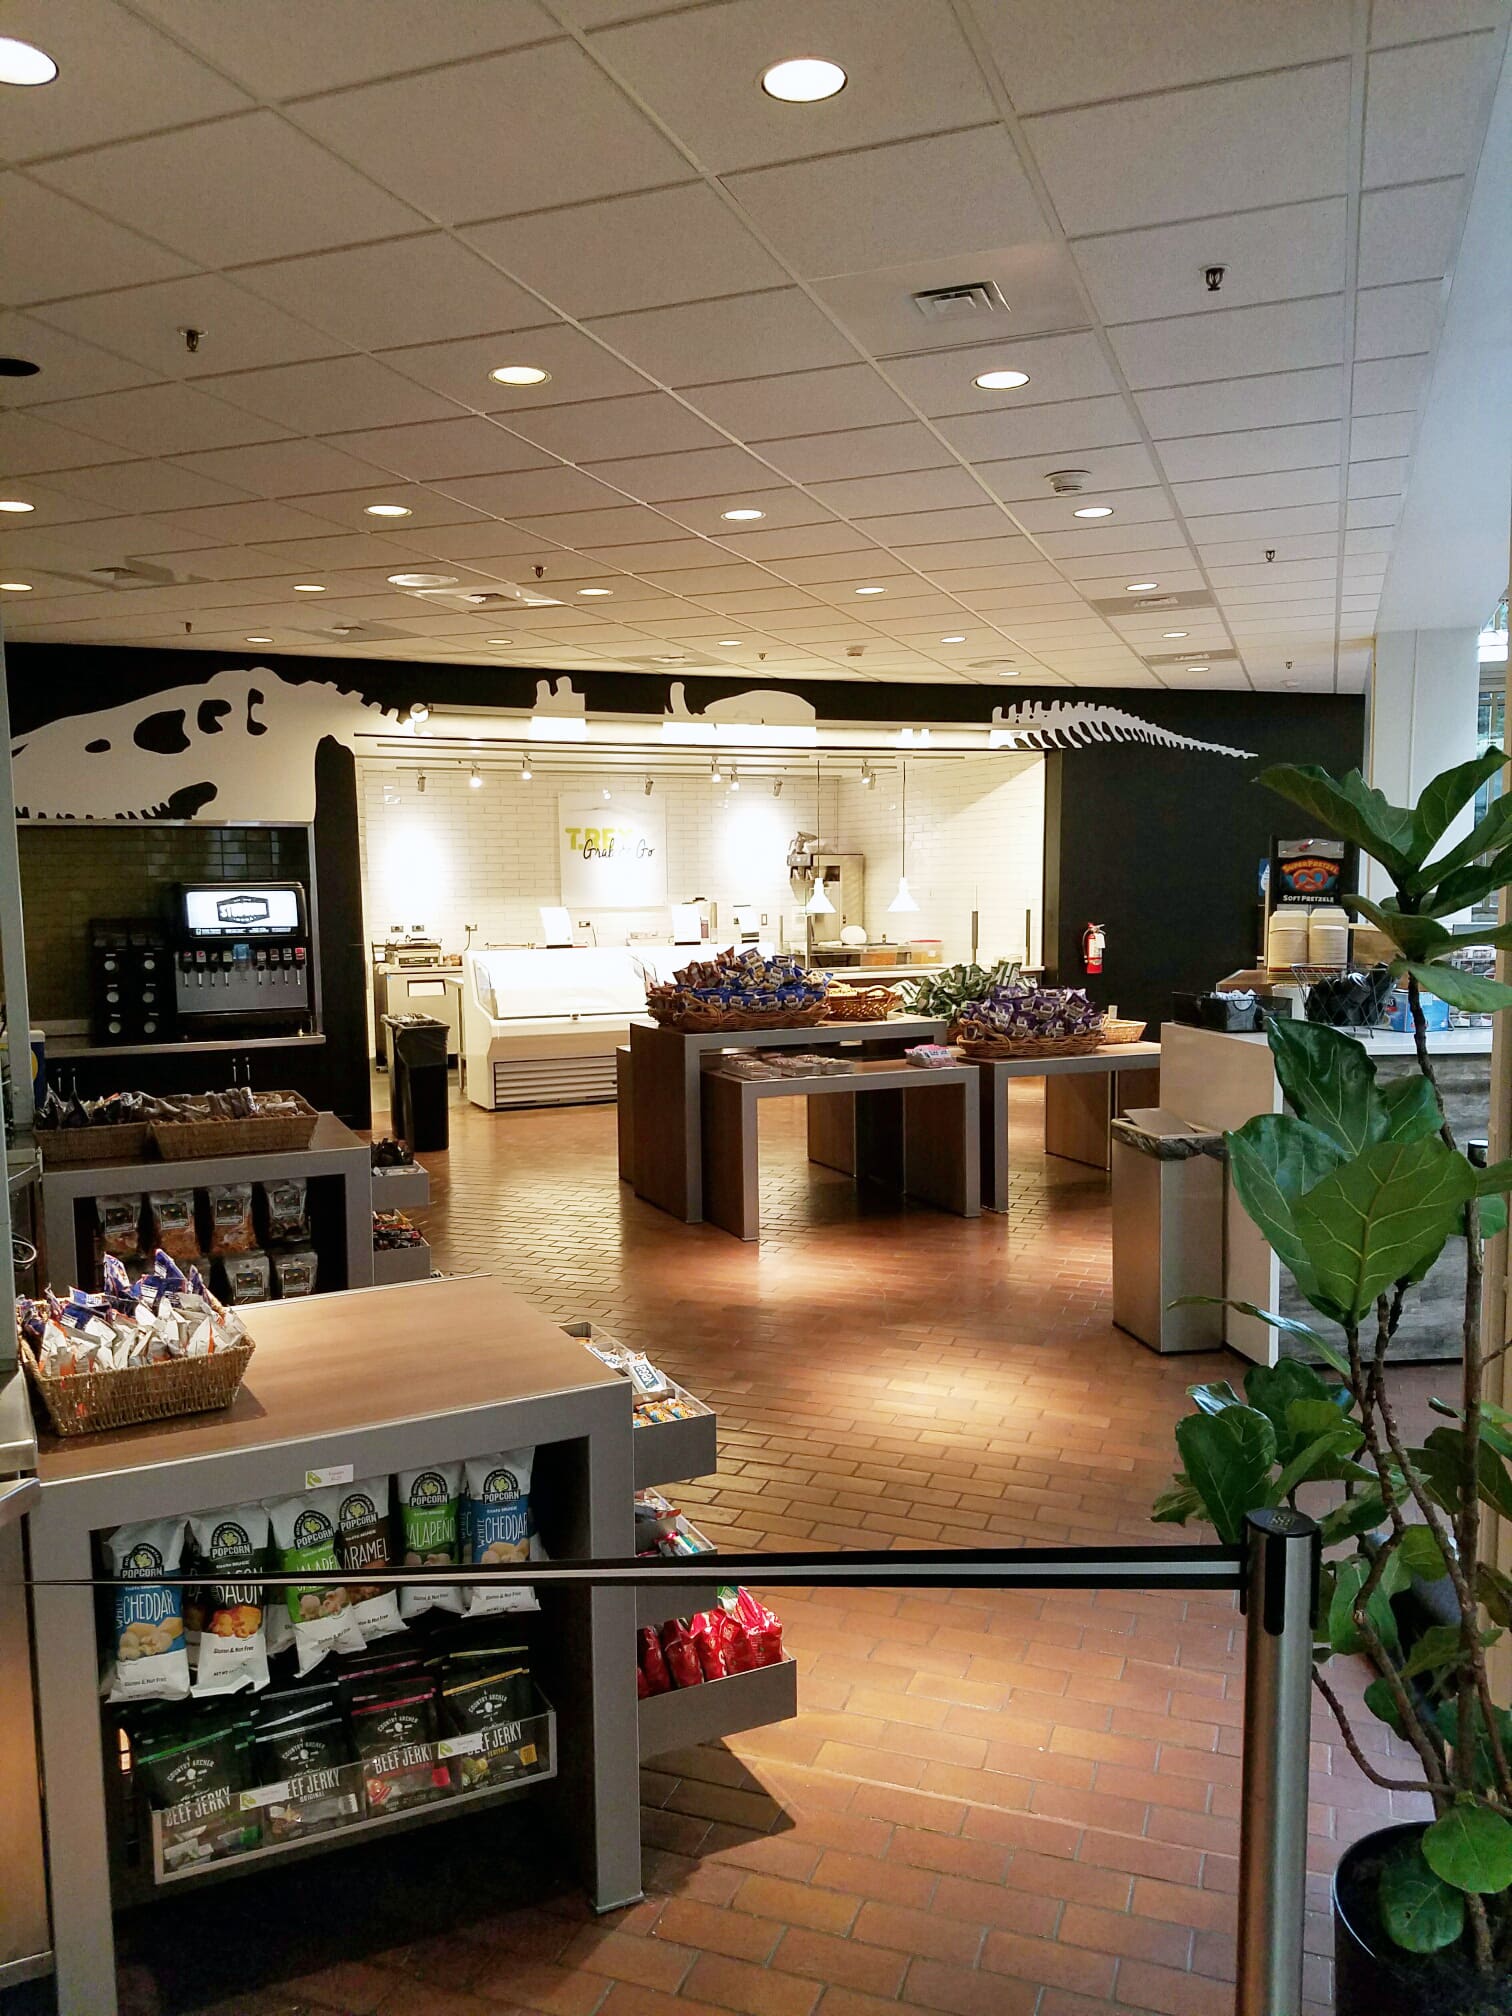 Vertix Builders Completes The Grab N Go Caf For DMNS Mile High CRE